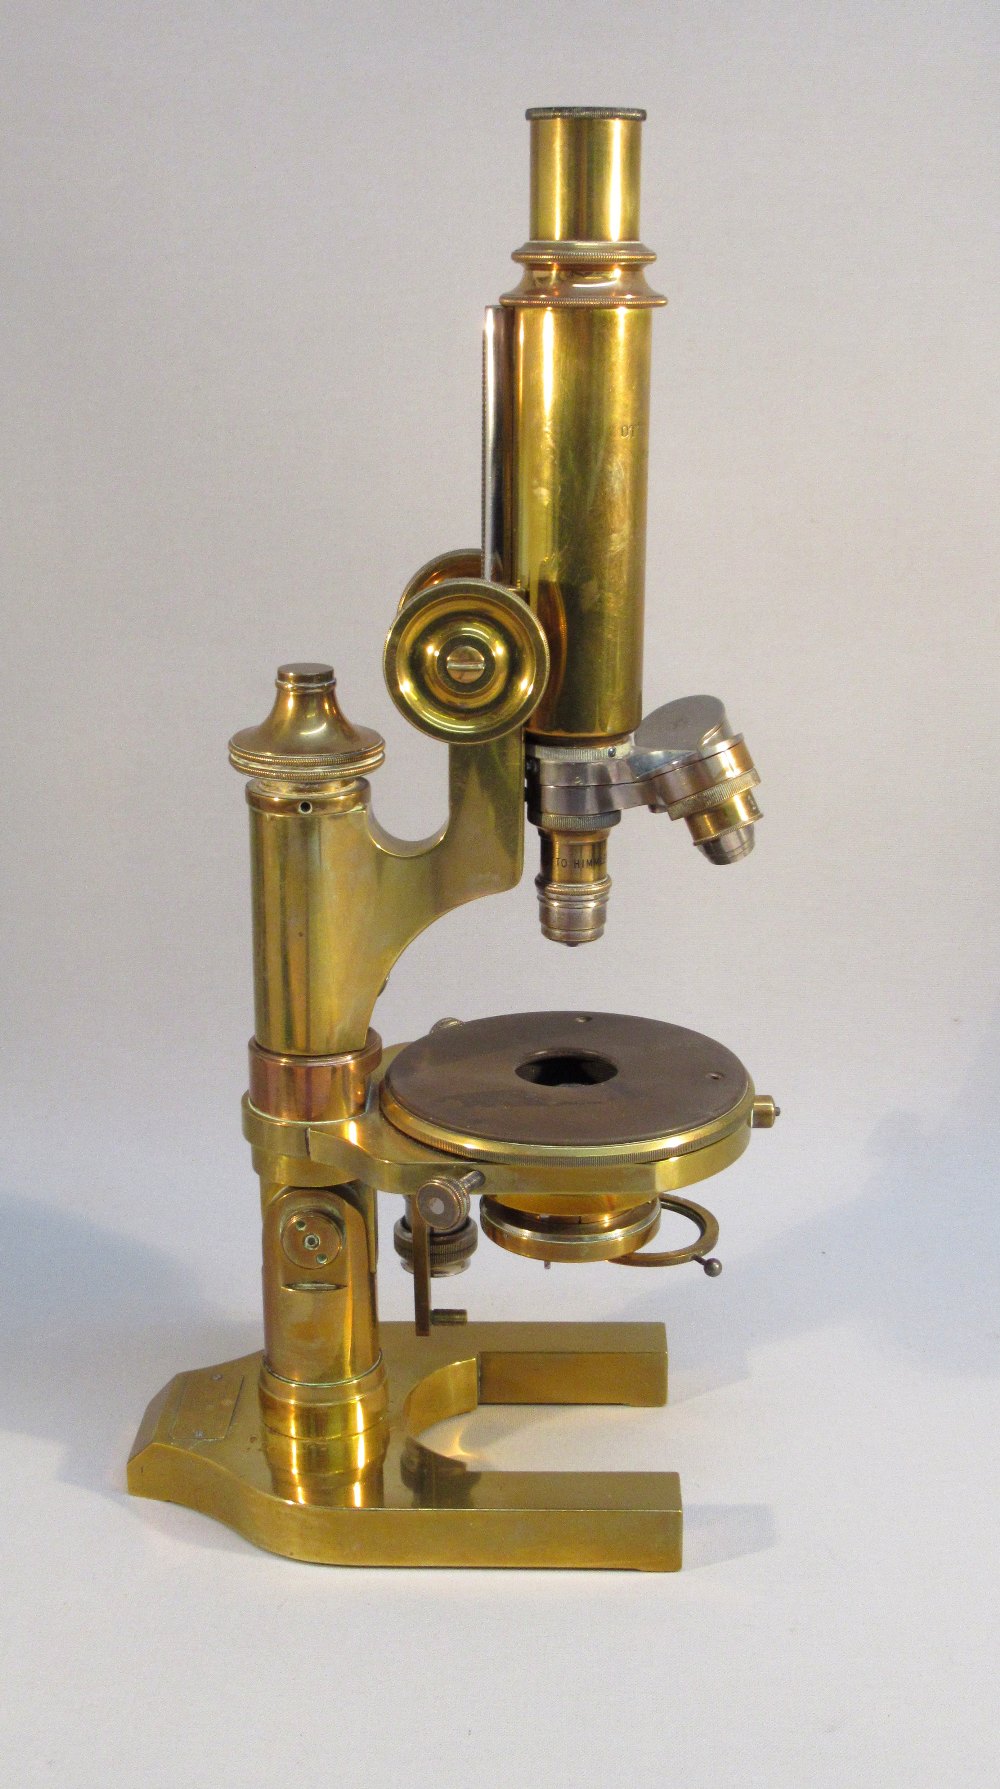 A LATE C19th BRASS MICROSCOPE BY OTTO HIMMLER. BERLIN N.14160 LACQUERED BRASS, HORSE SHOE FOOT,